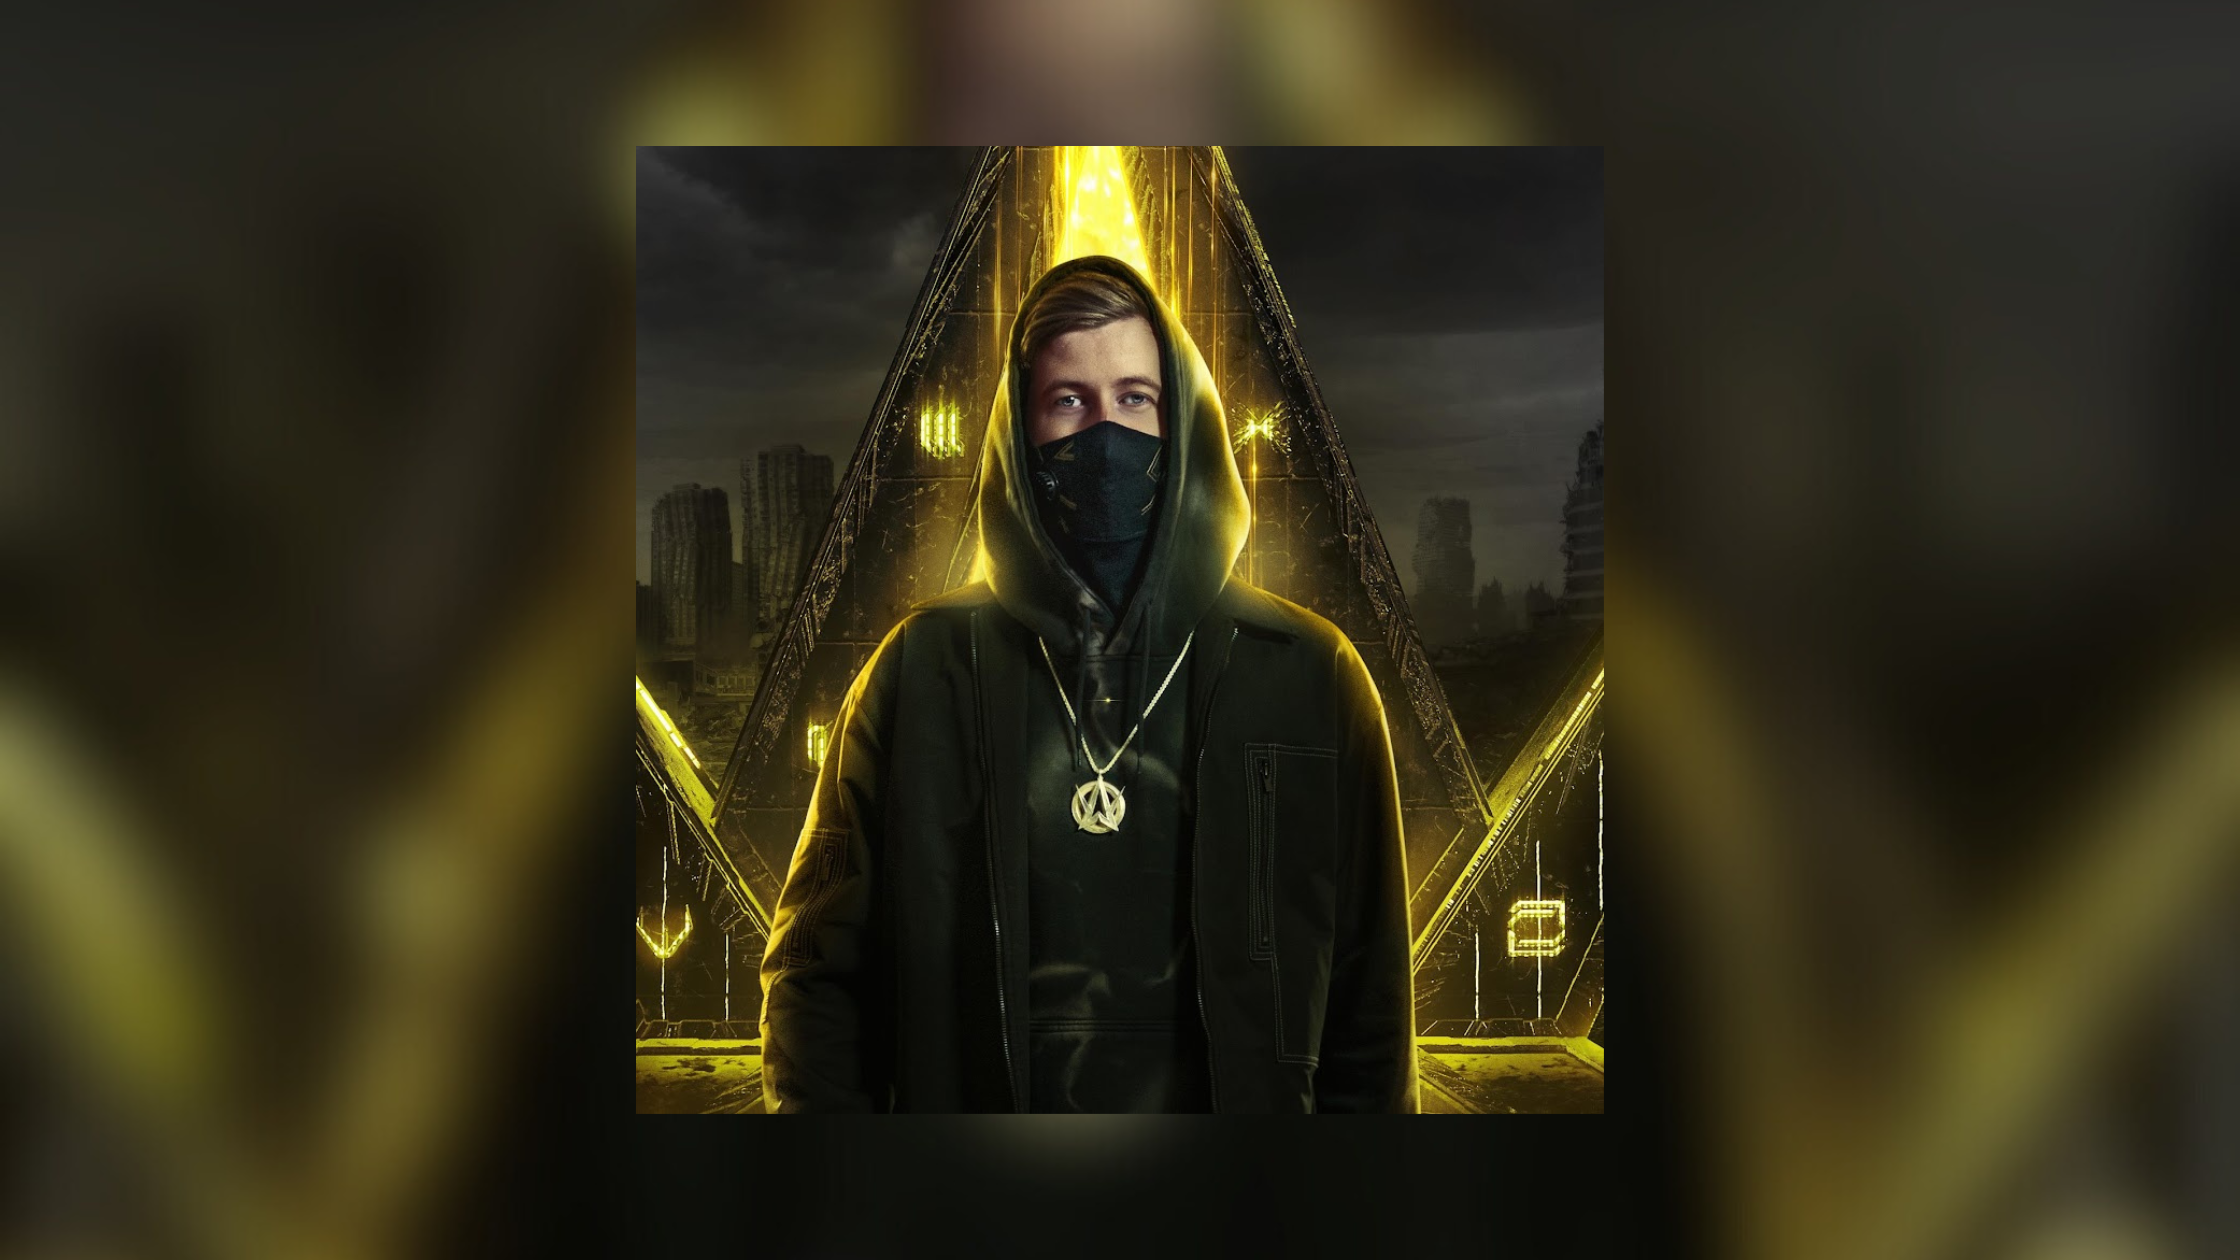 Listen to “Hero” the incredible new song by Alan Walker and Sasha Alex Sloan – released through RouteNote